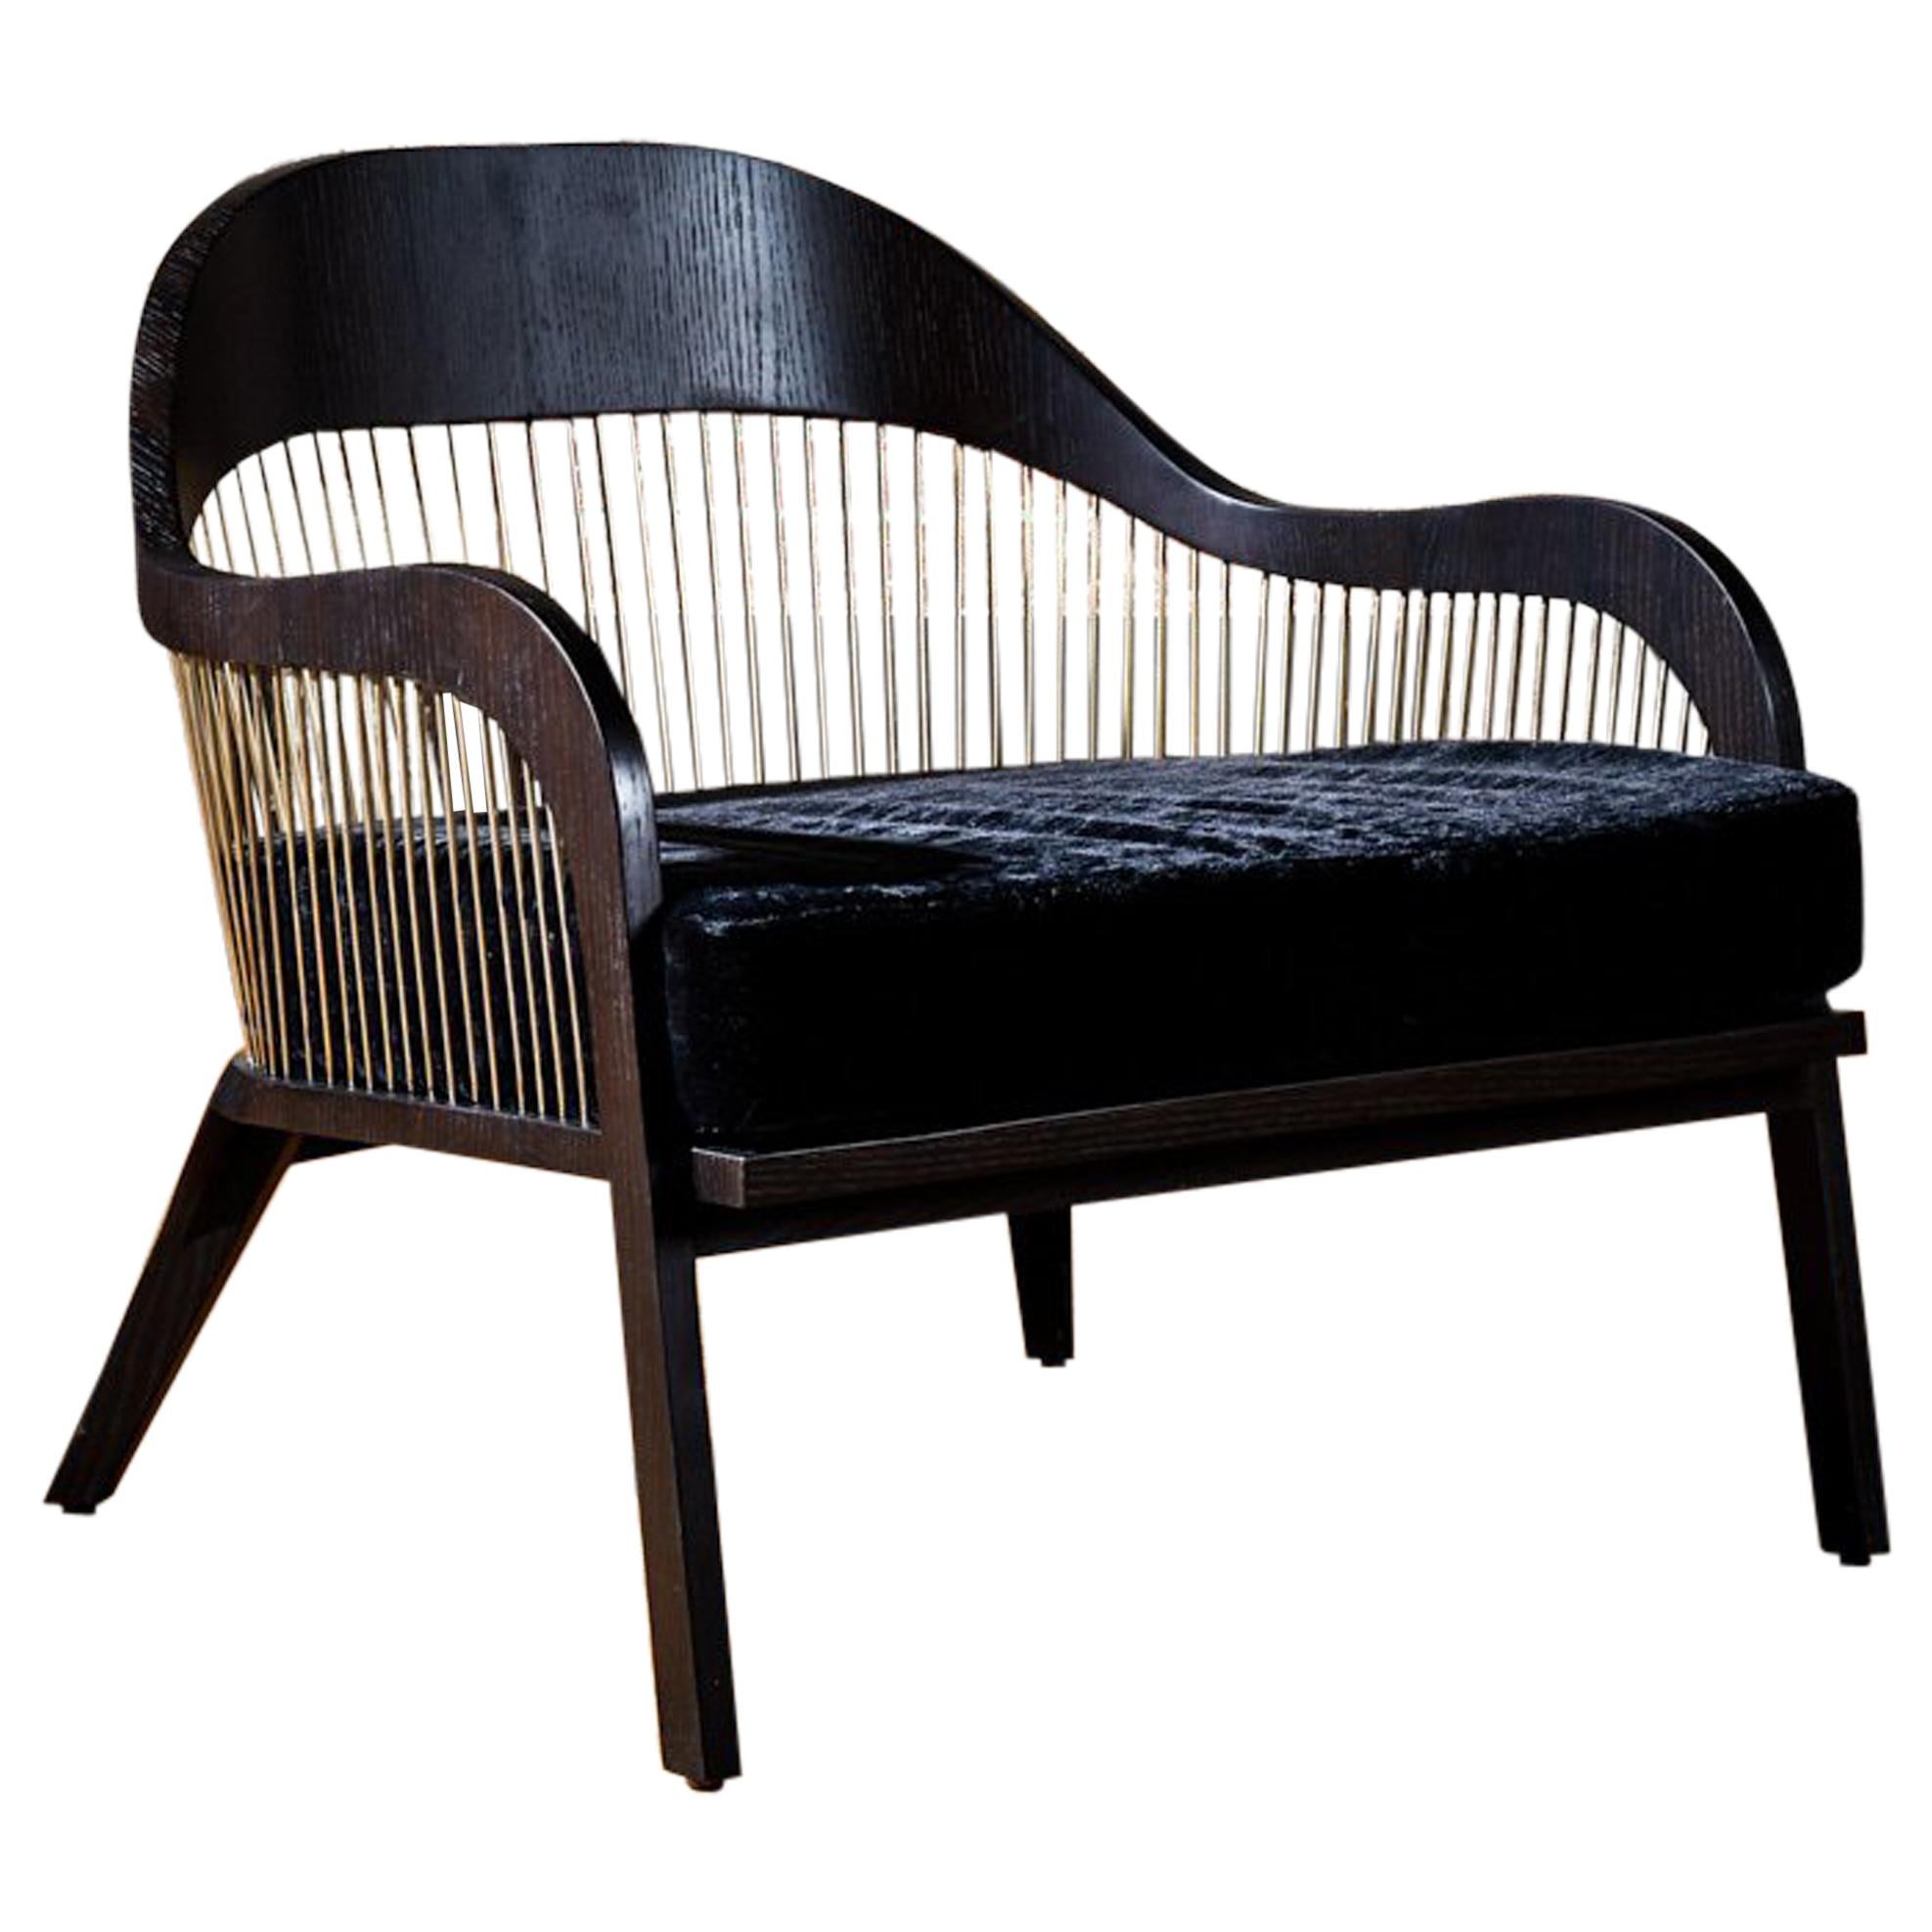 Lanka Armchair, by Reda Amalou Design, 2015 -  Contemporary bergere seat For Sale